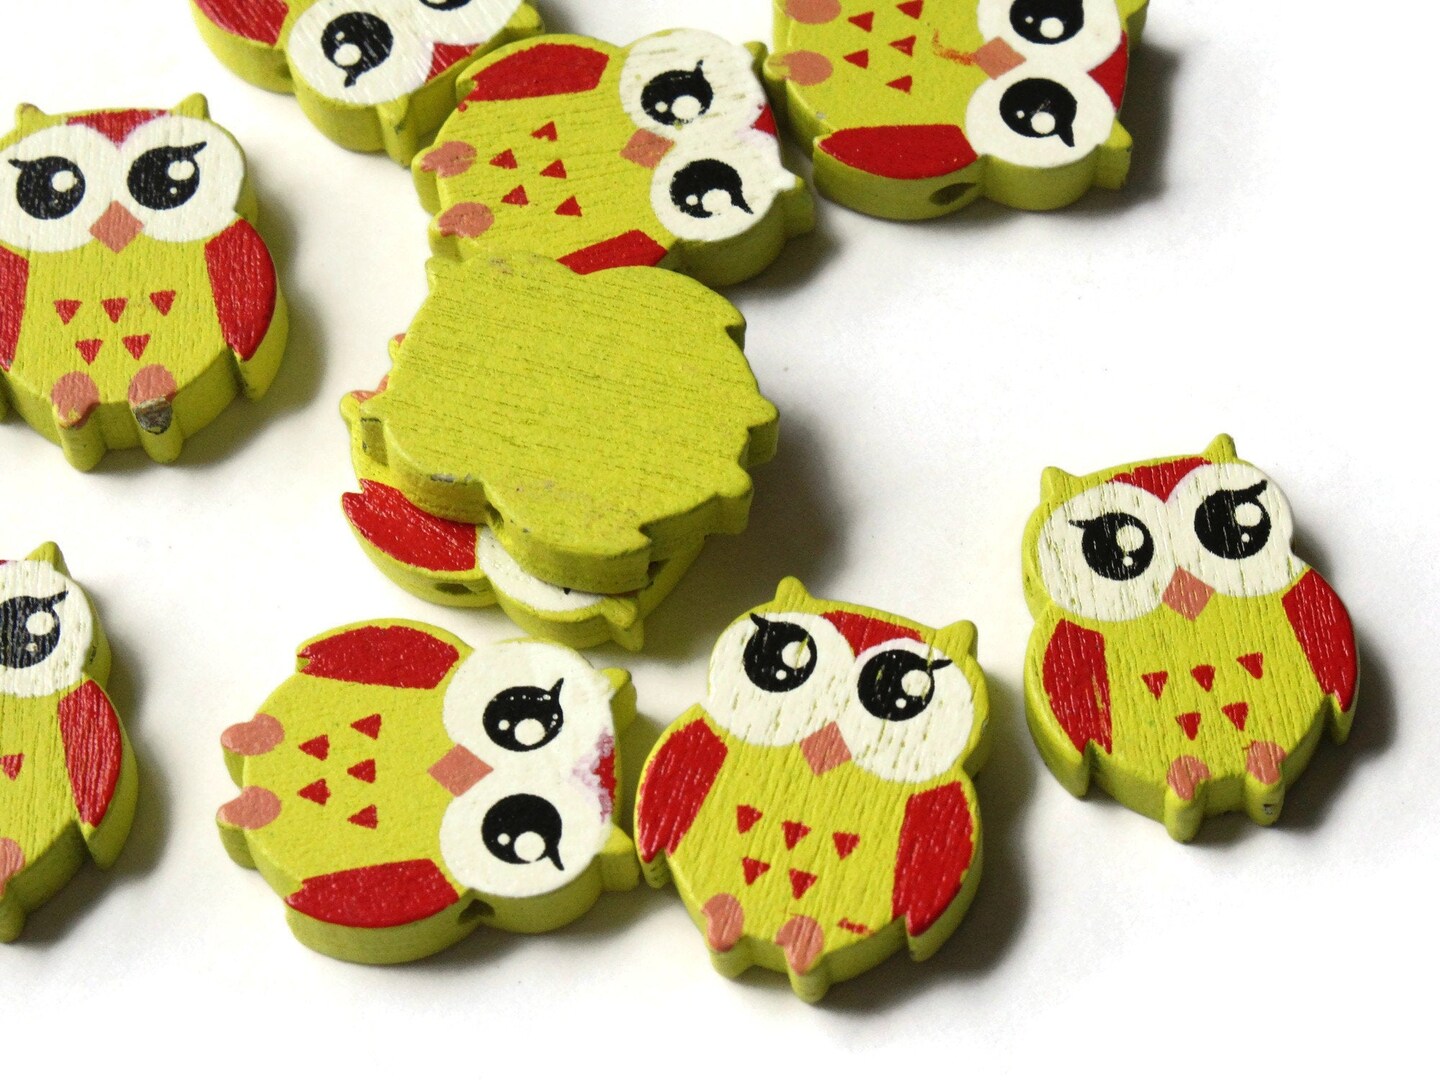 12 22mm Yellow Wooden Owl Beads Wood Animal Beads Cute Bird Beads Novelty  Beads to String